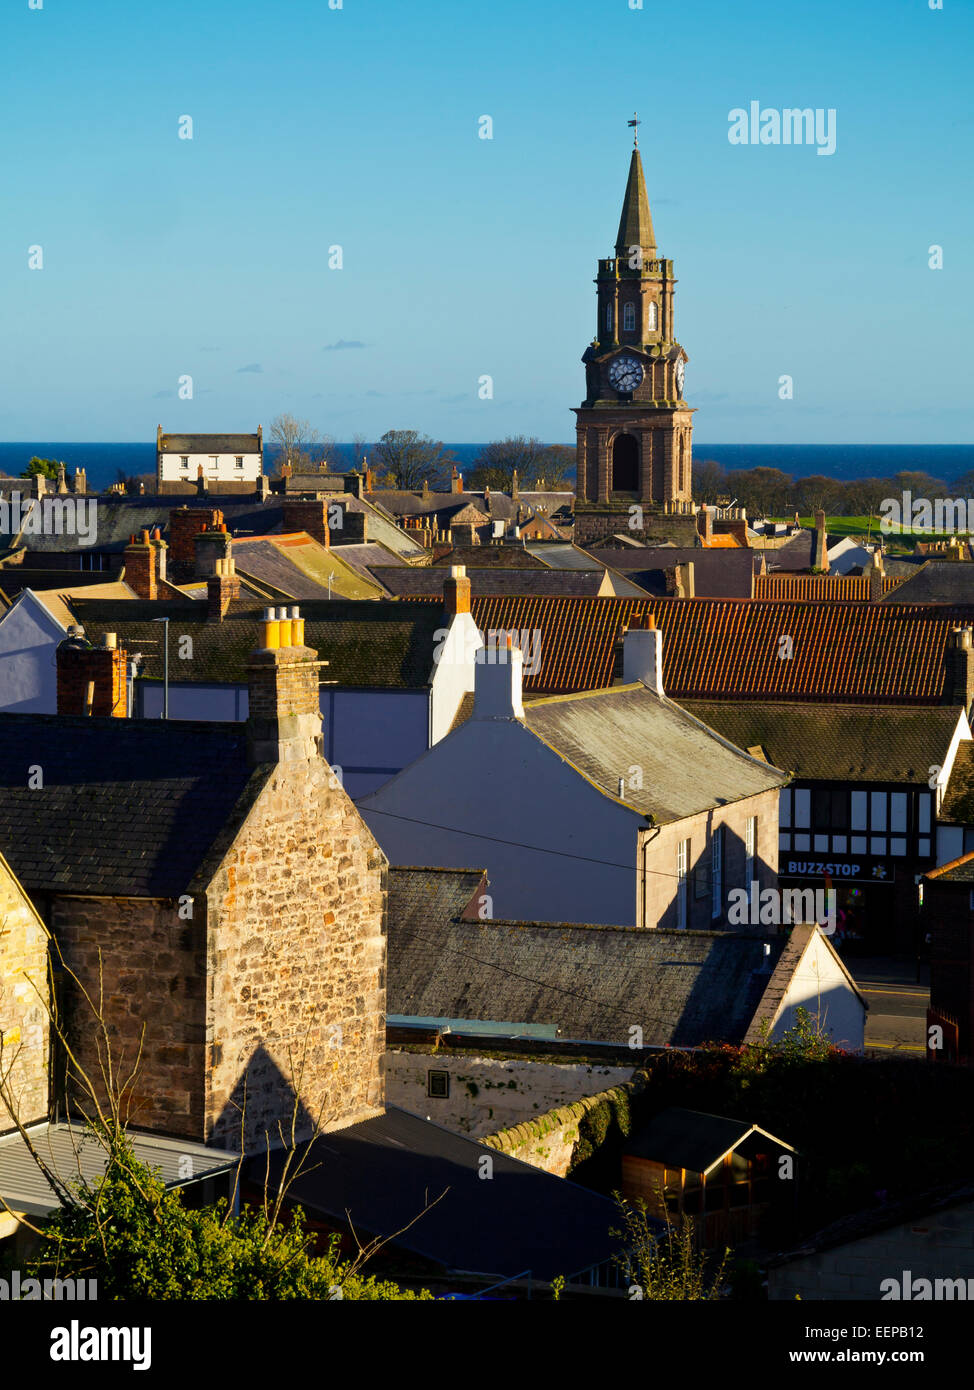 View across Berwick Upon Tweed town centre skyline with the Town Hall spire visible in the distance Northumberland England UK Stock Photo